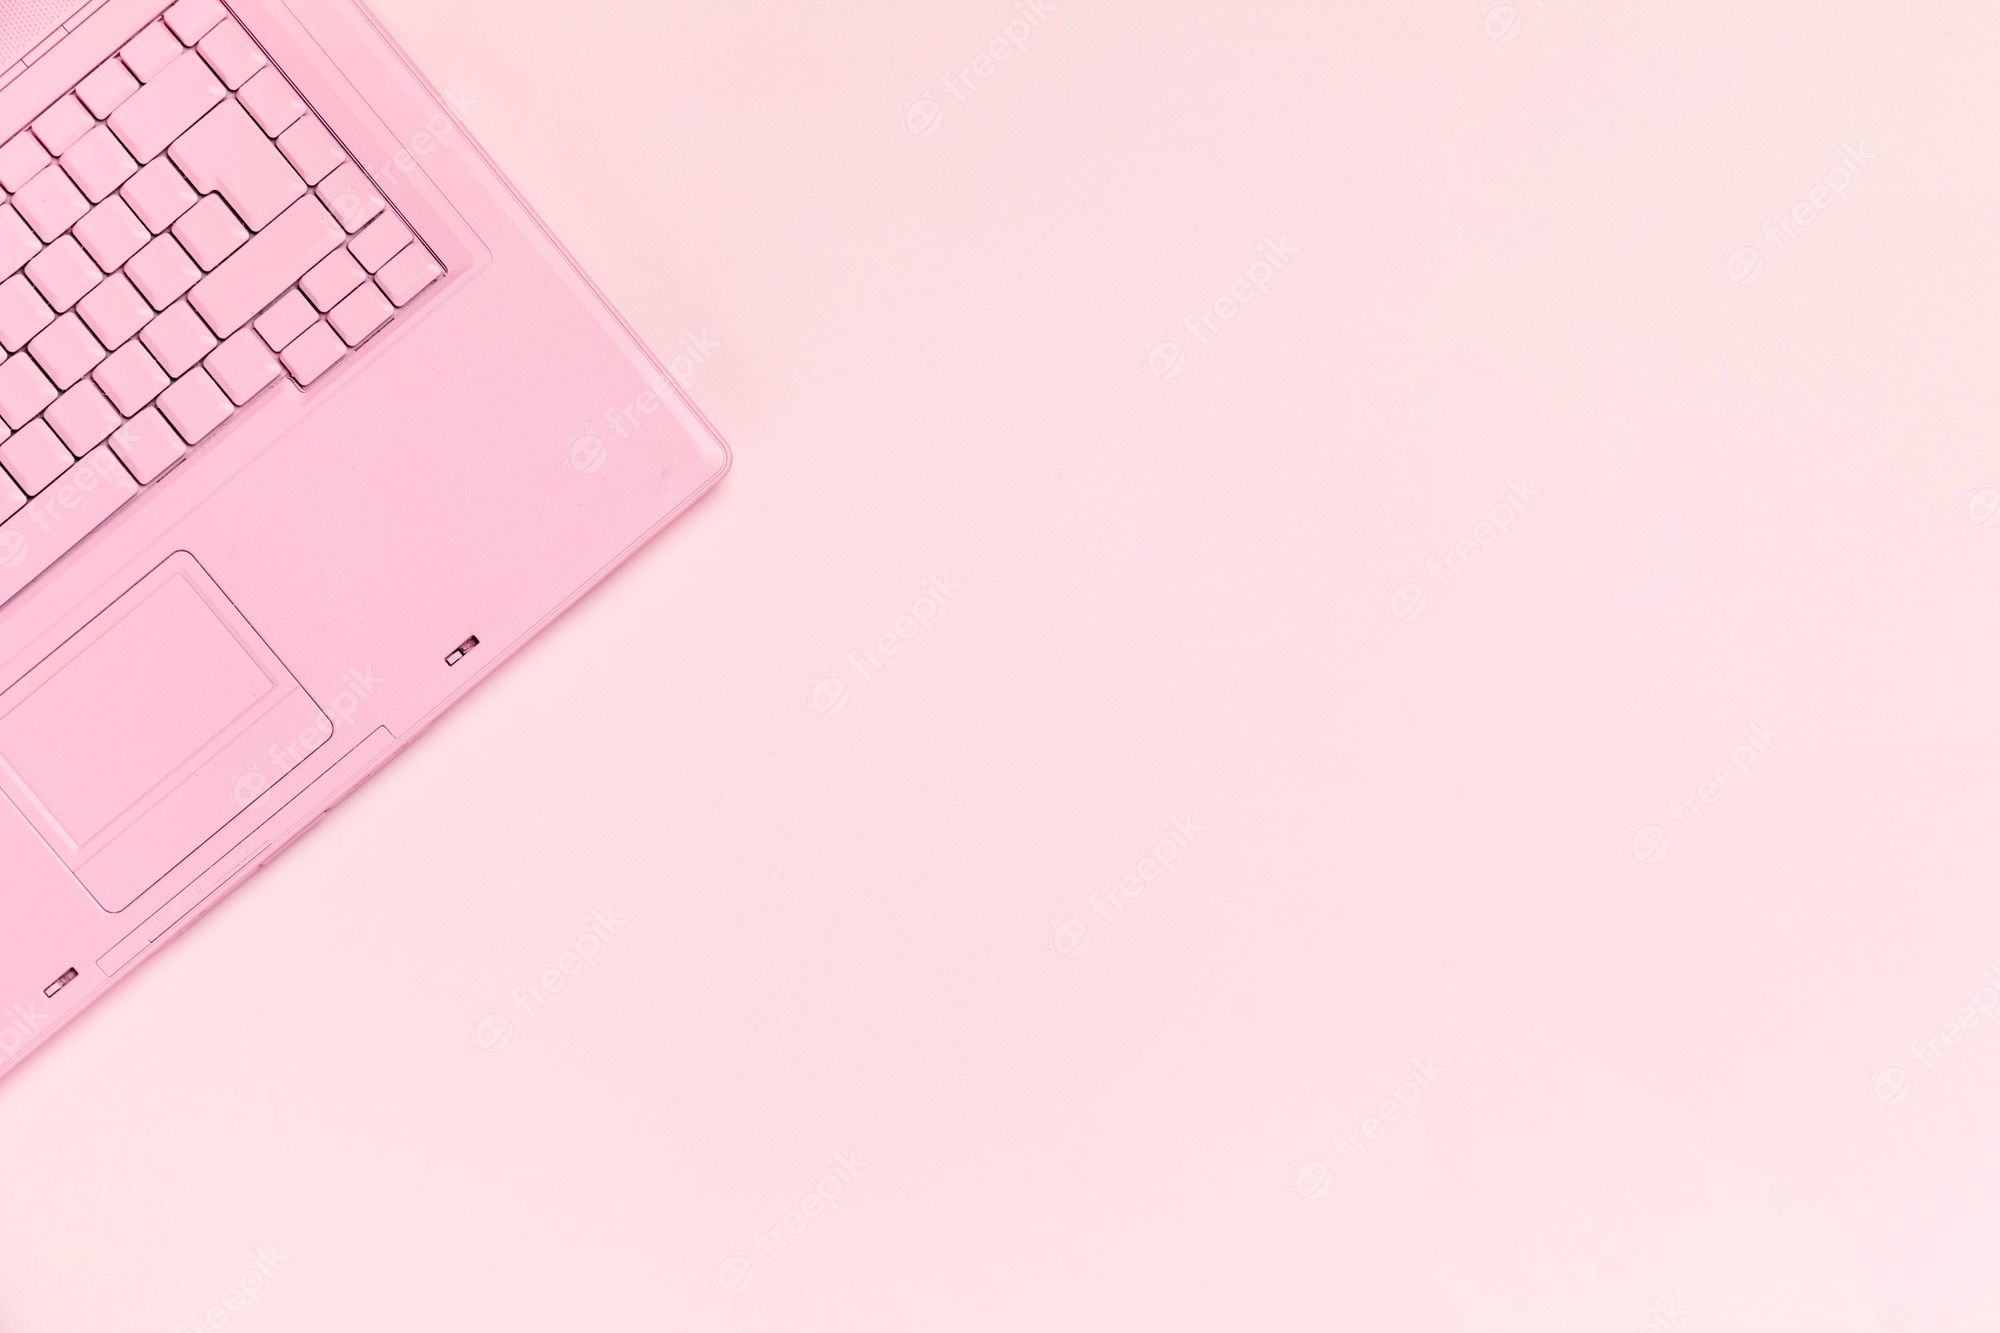 A pink laptop on a pink background - Pink